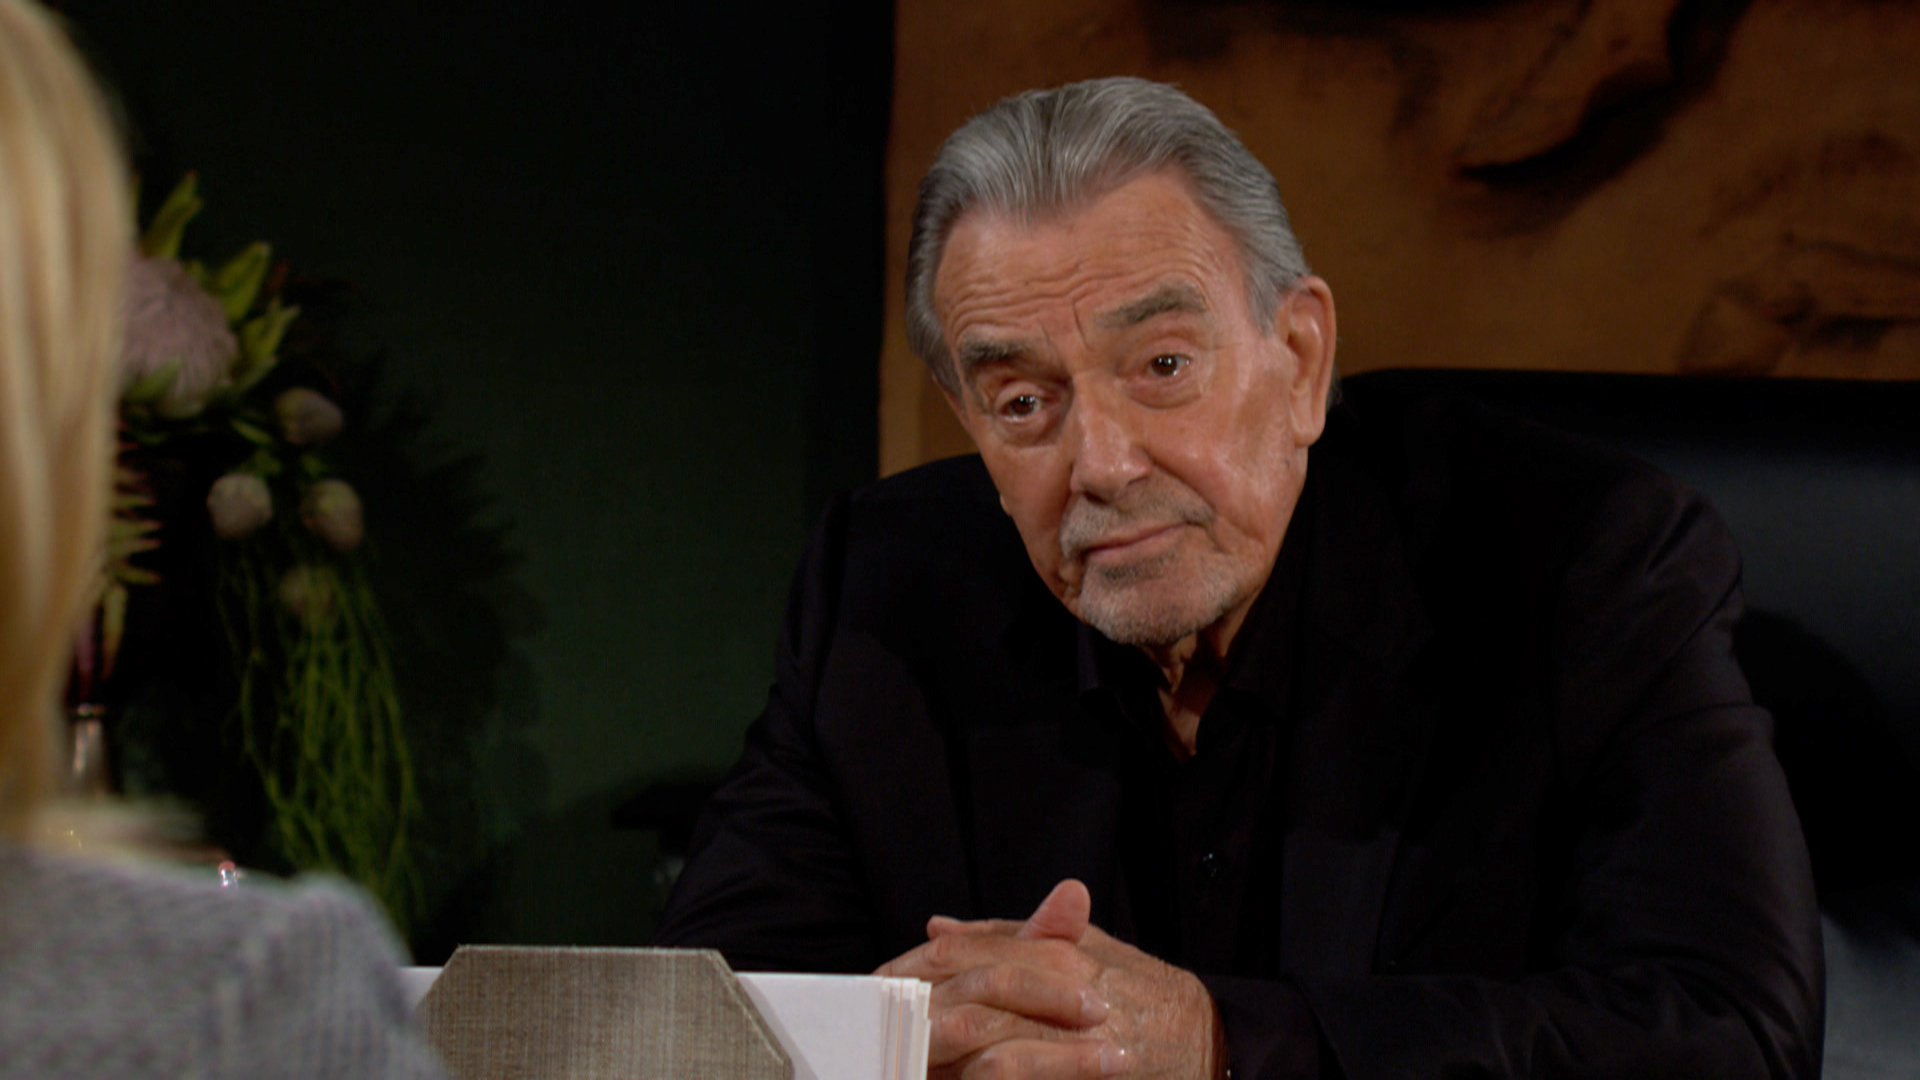 The Young and the Restless spoilers: week of July 29-August 2